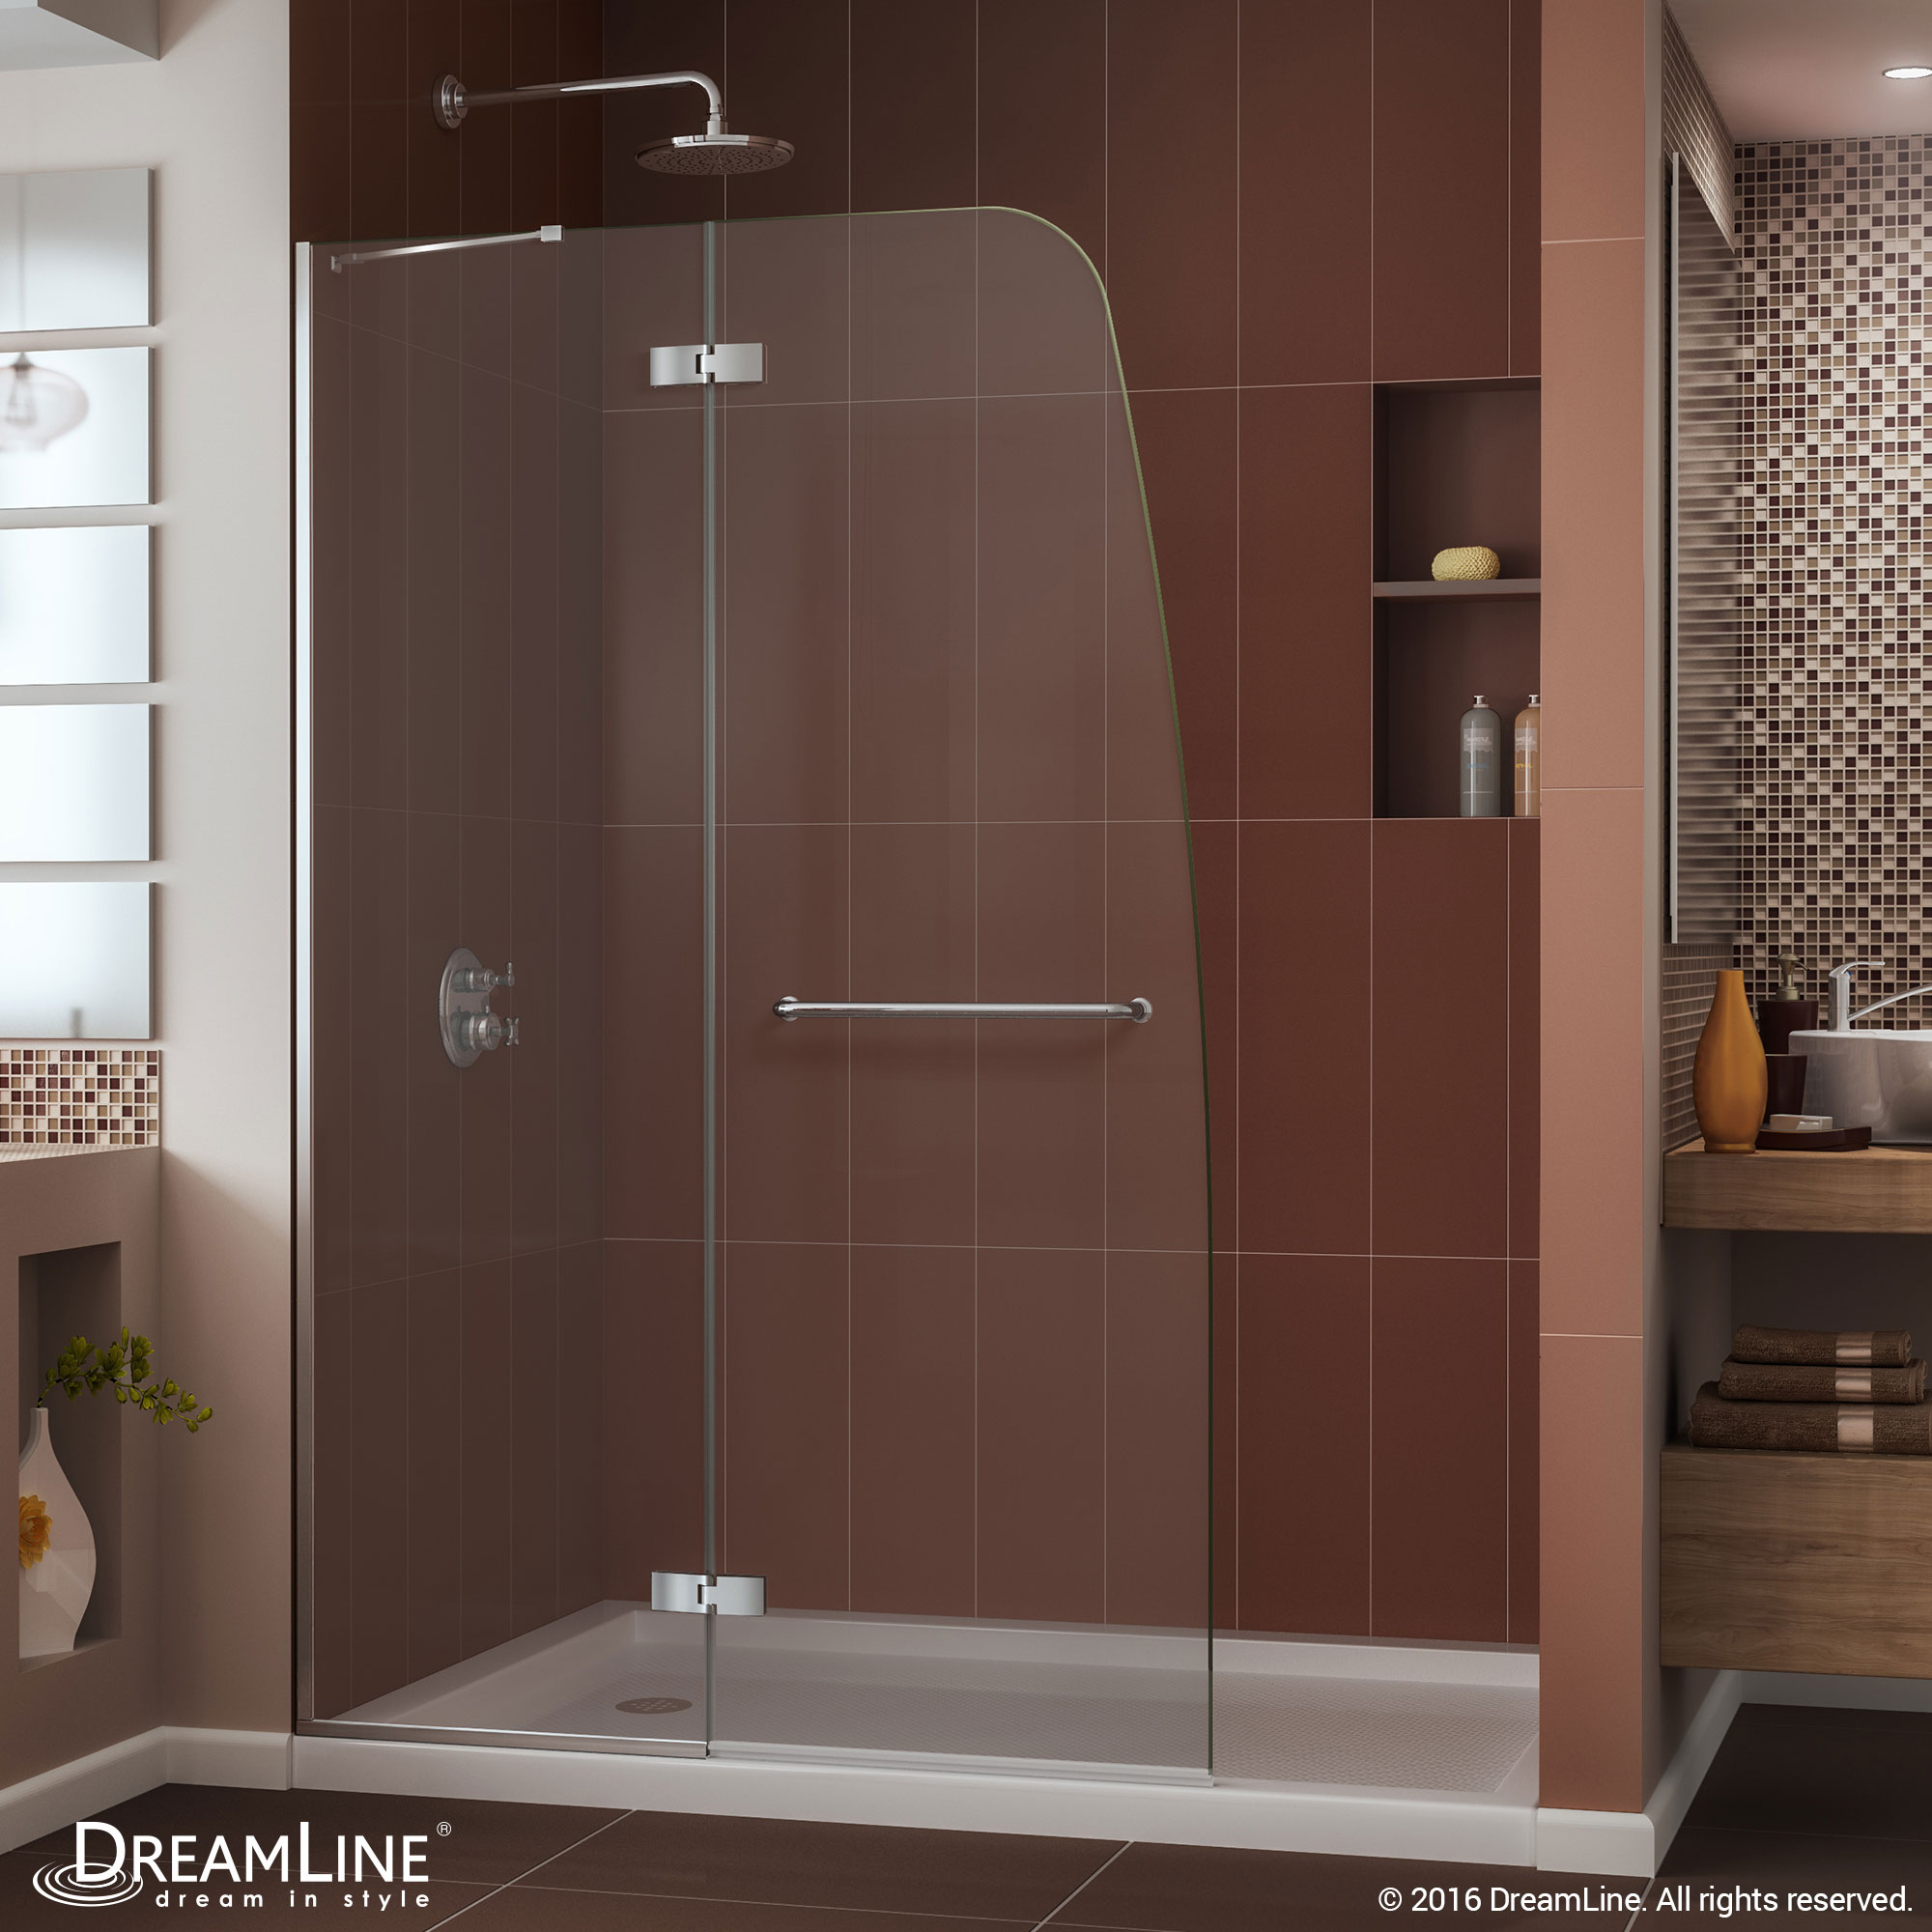 DreamLine Aqua Ultra 30 in. D x 60 in. W x 74 3/4 in. H Frameless Shower Door in Chrome and Center Drain Biscuit Base Kit